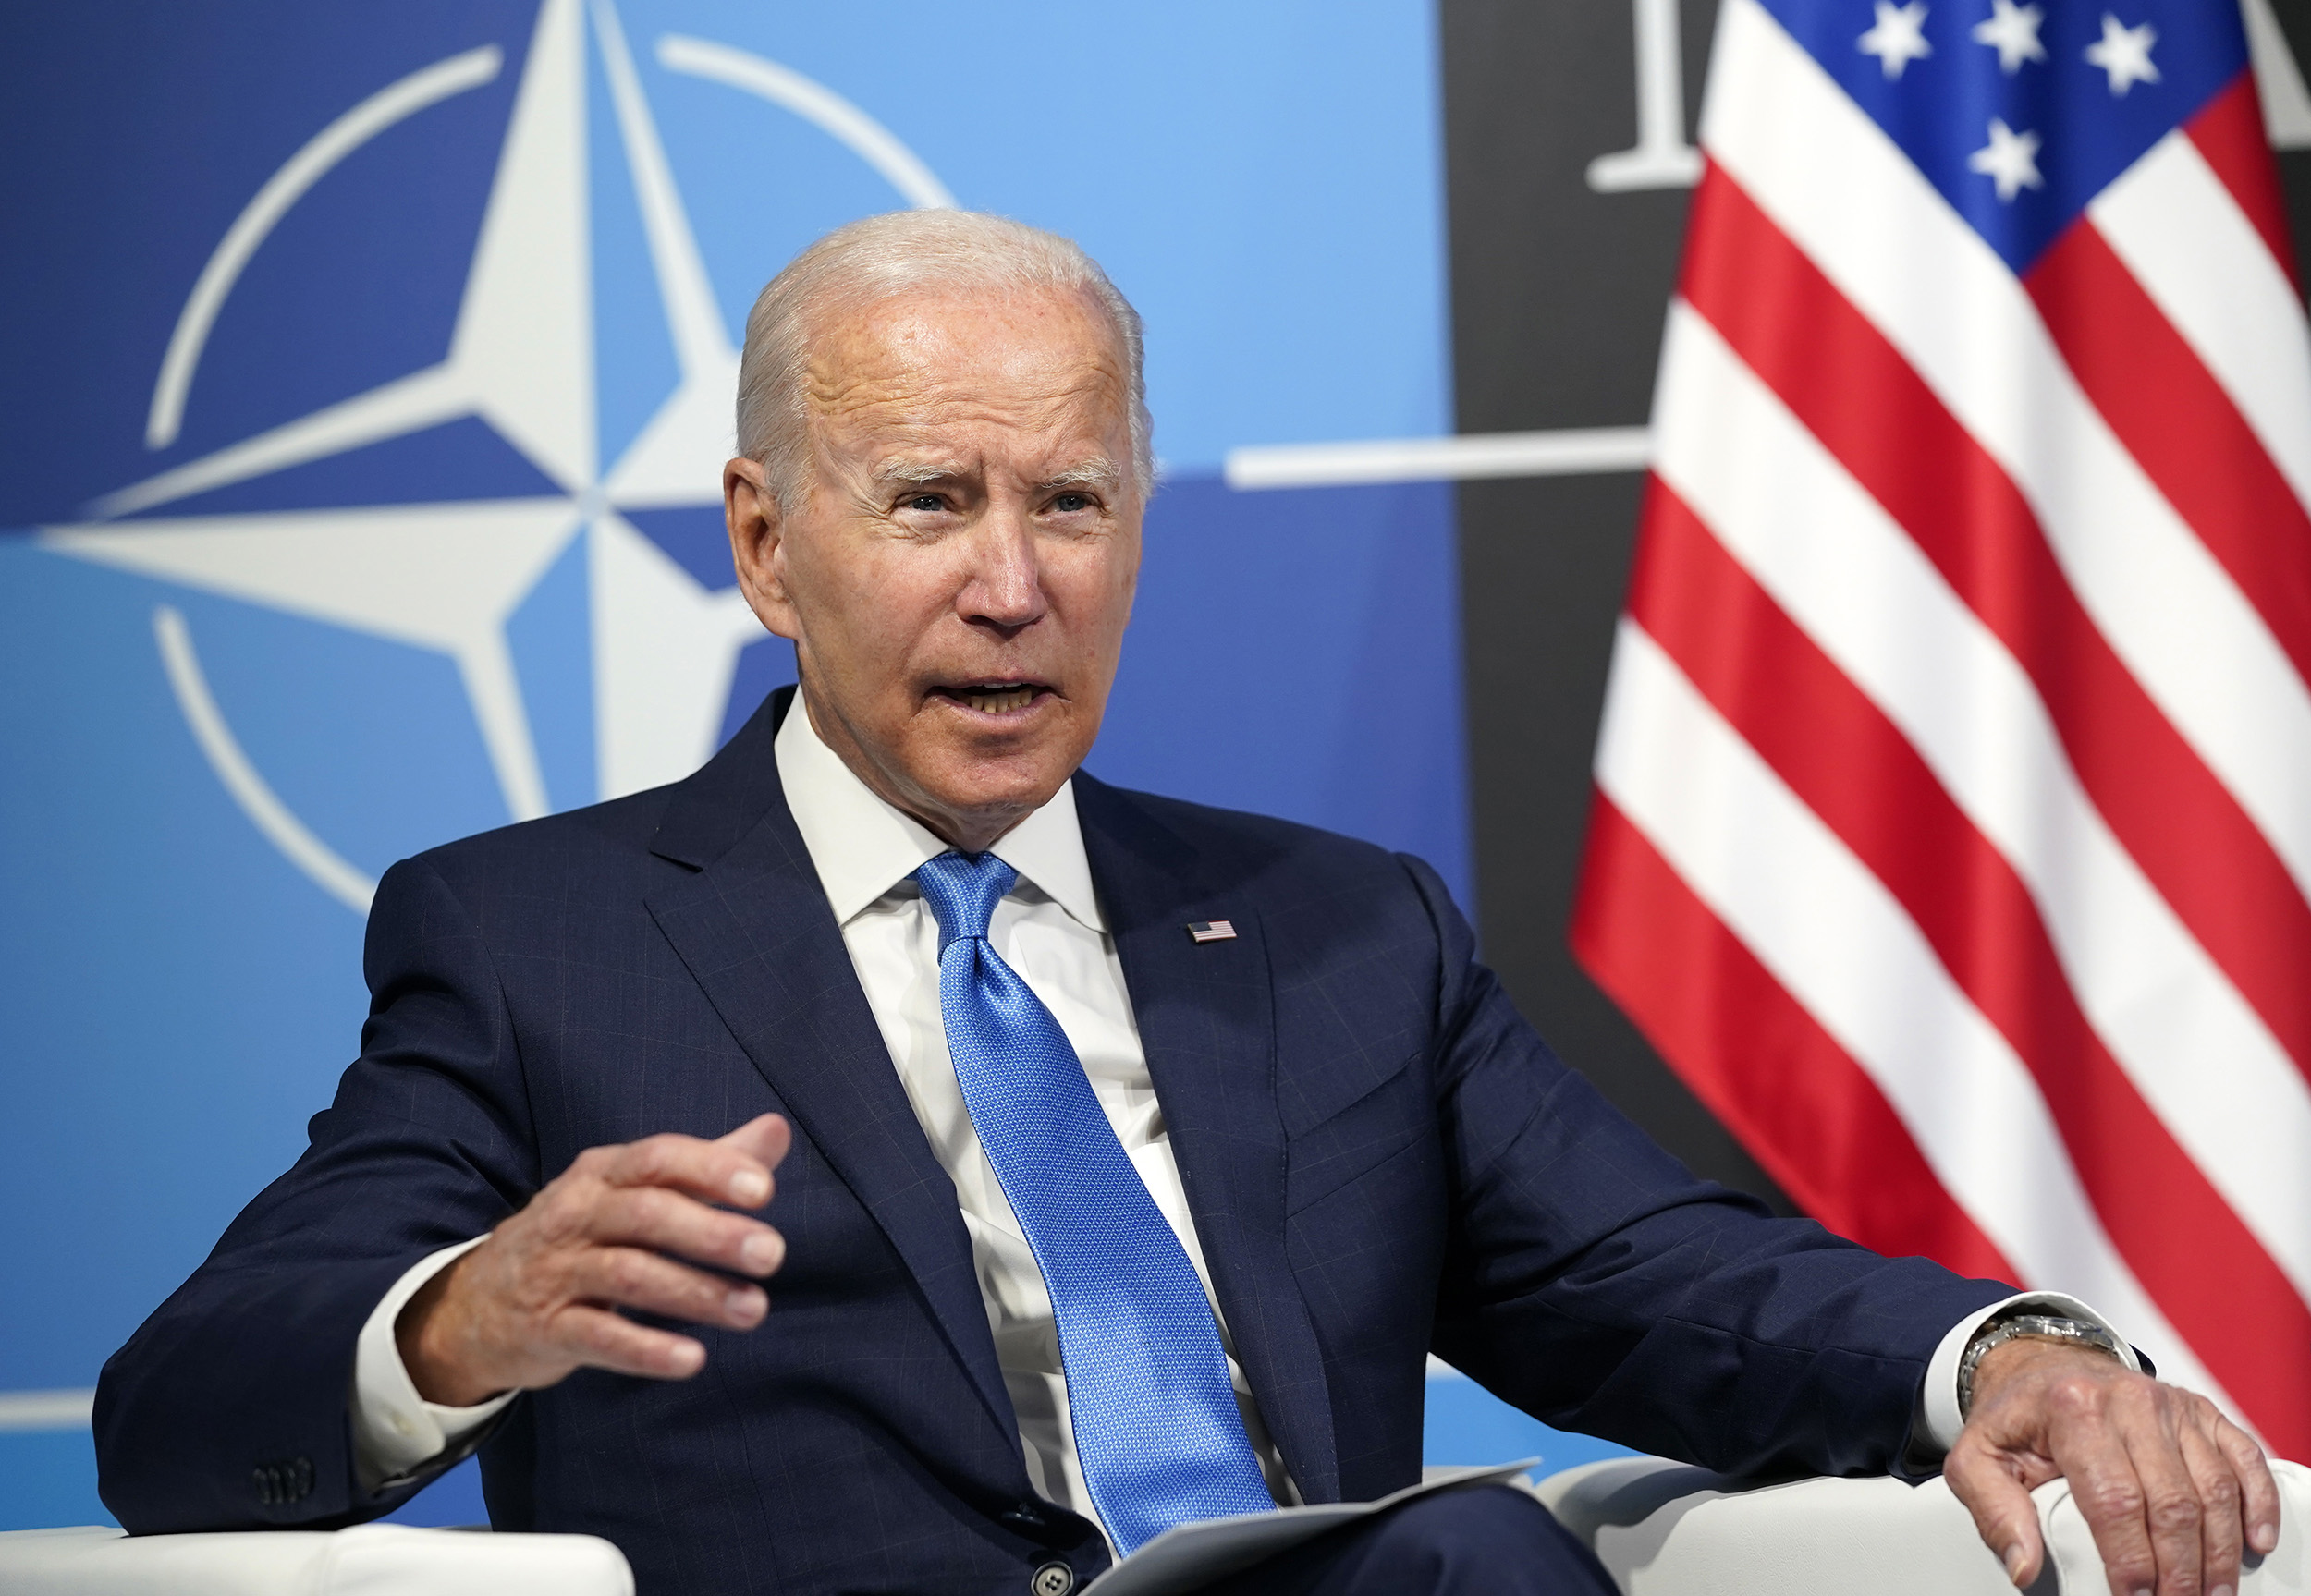 U.S. President Joe Biden speaks during a meeting with NATO Secretary General Jens Stoltenberg at the NATO summit in Madrid, Spain, on June 29.